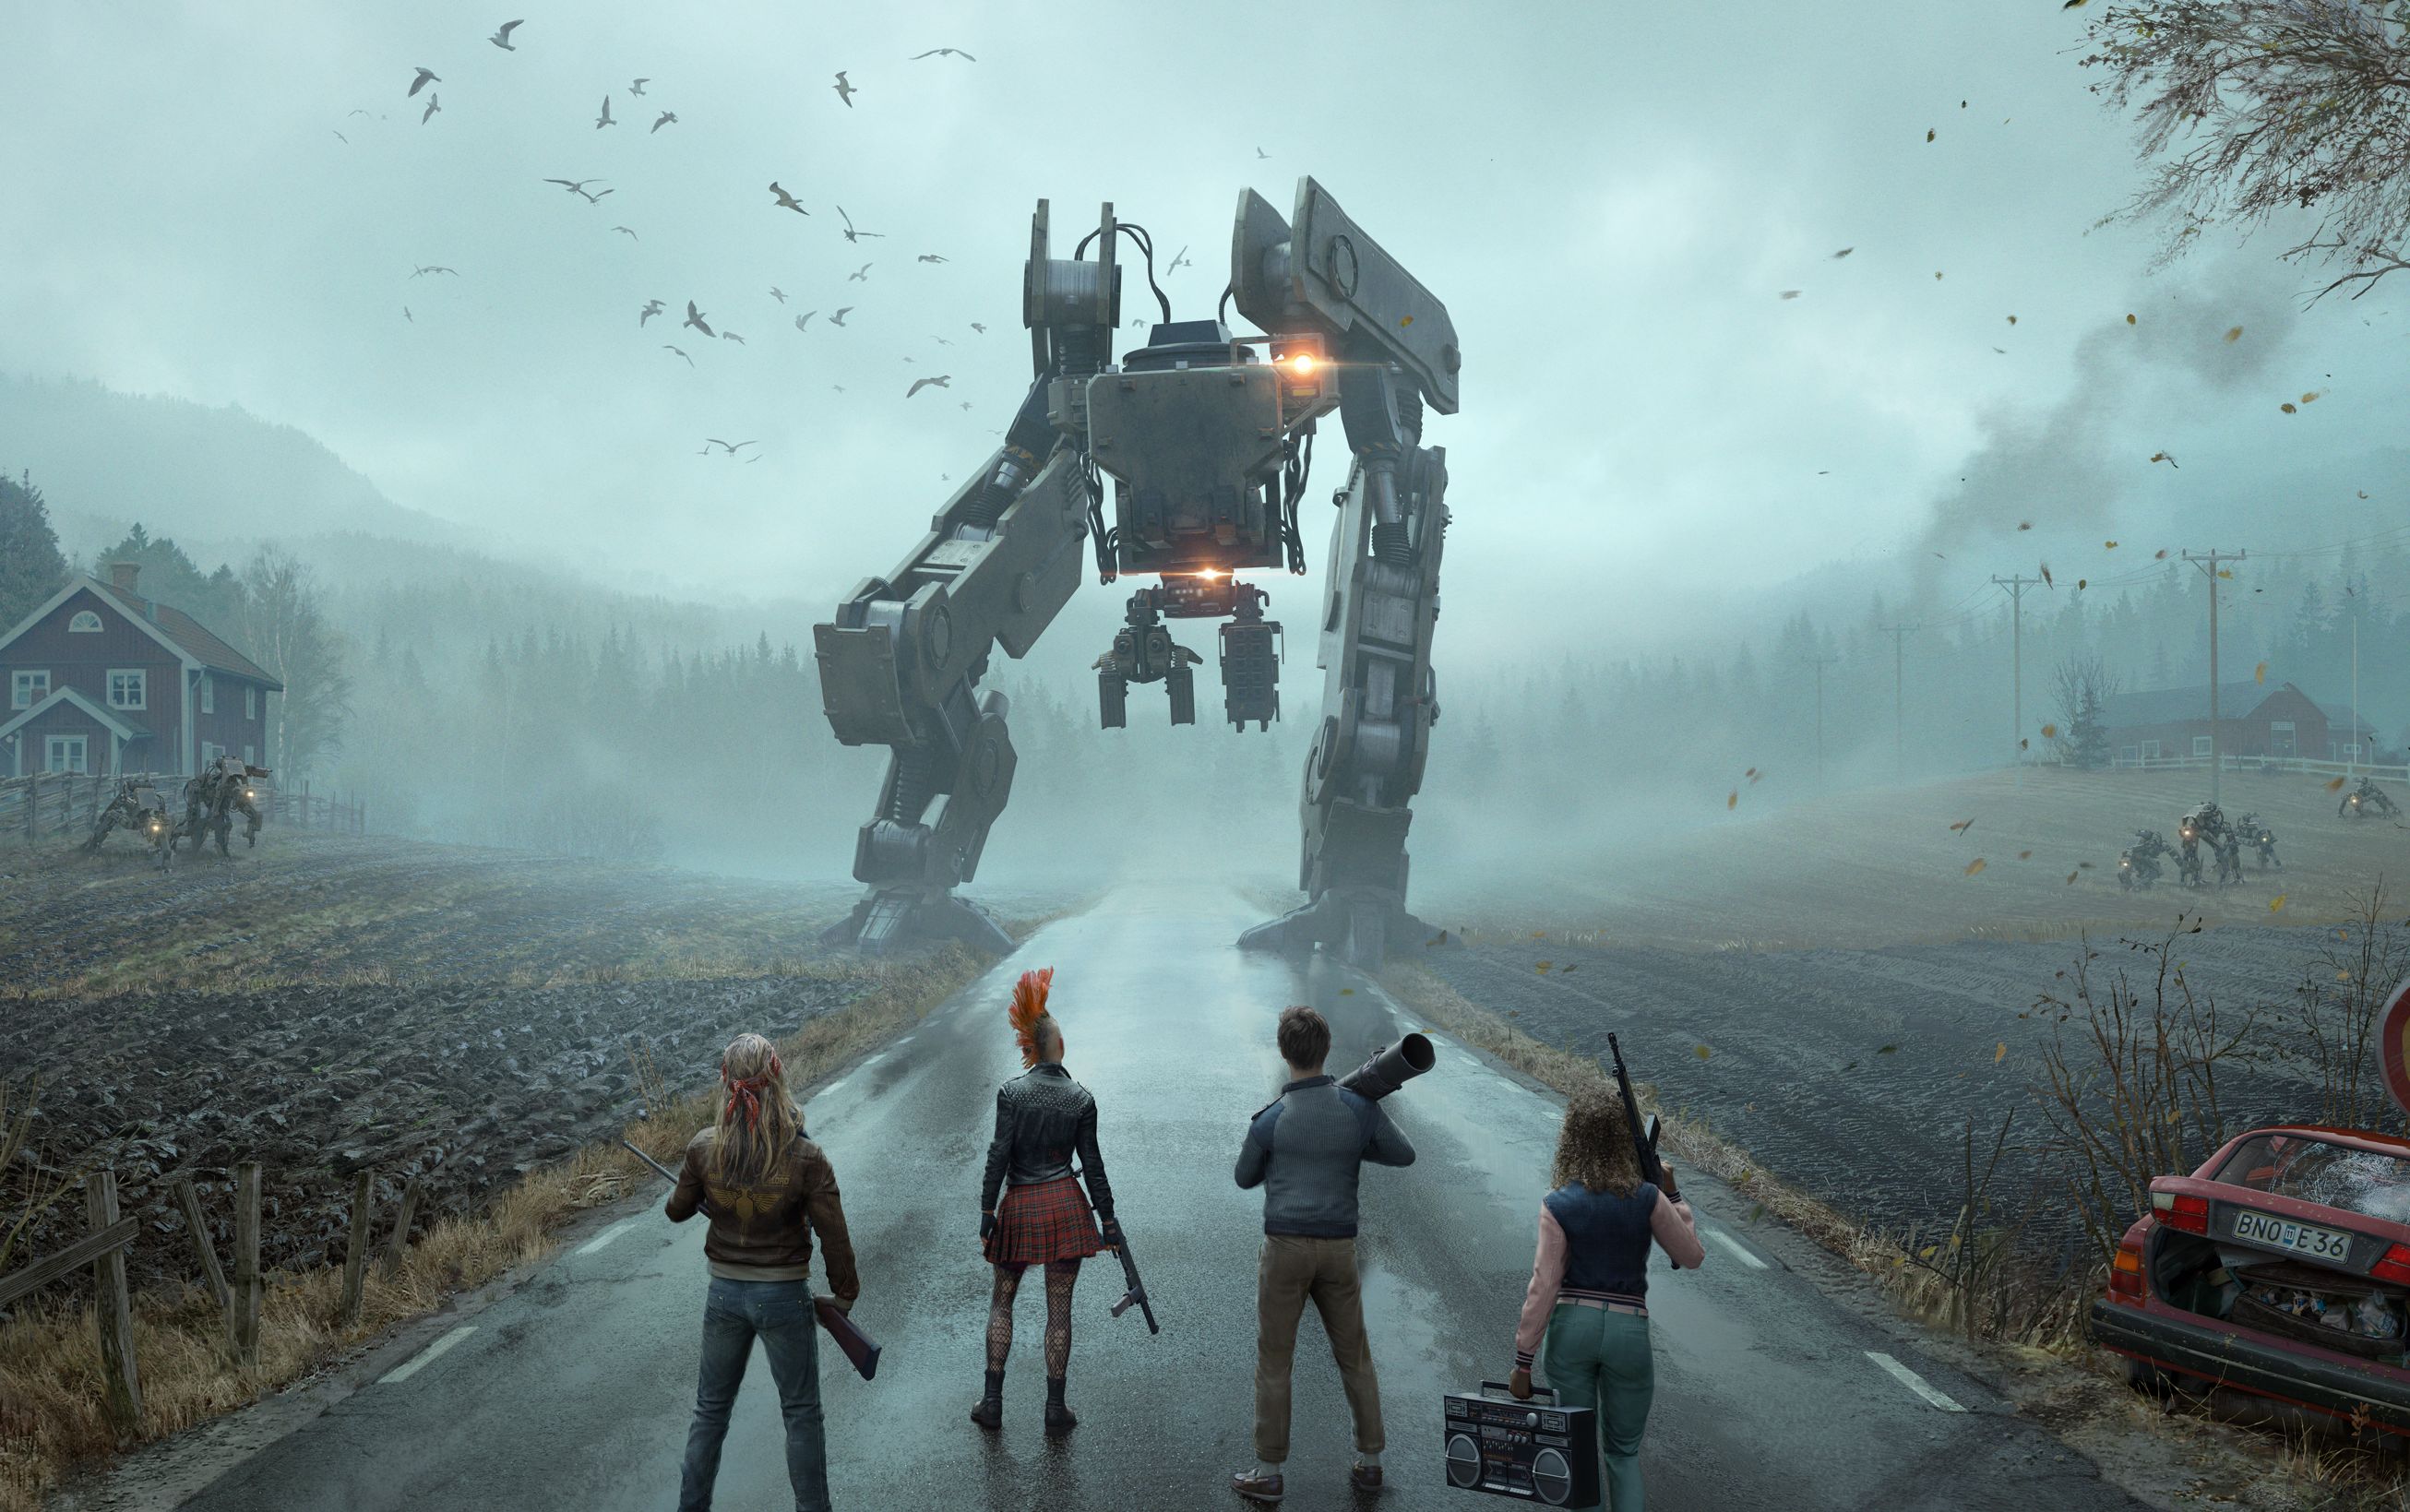 Generation Zero is a fun but simple co-op FPS where the evil robots are the real stars PC Gamer